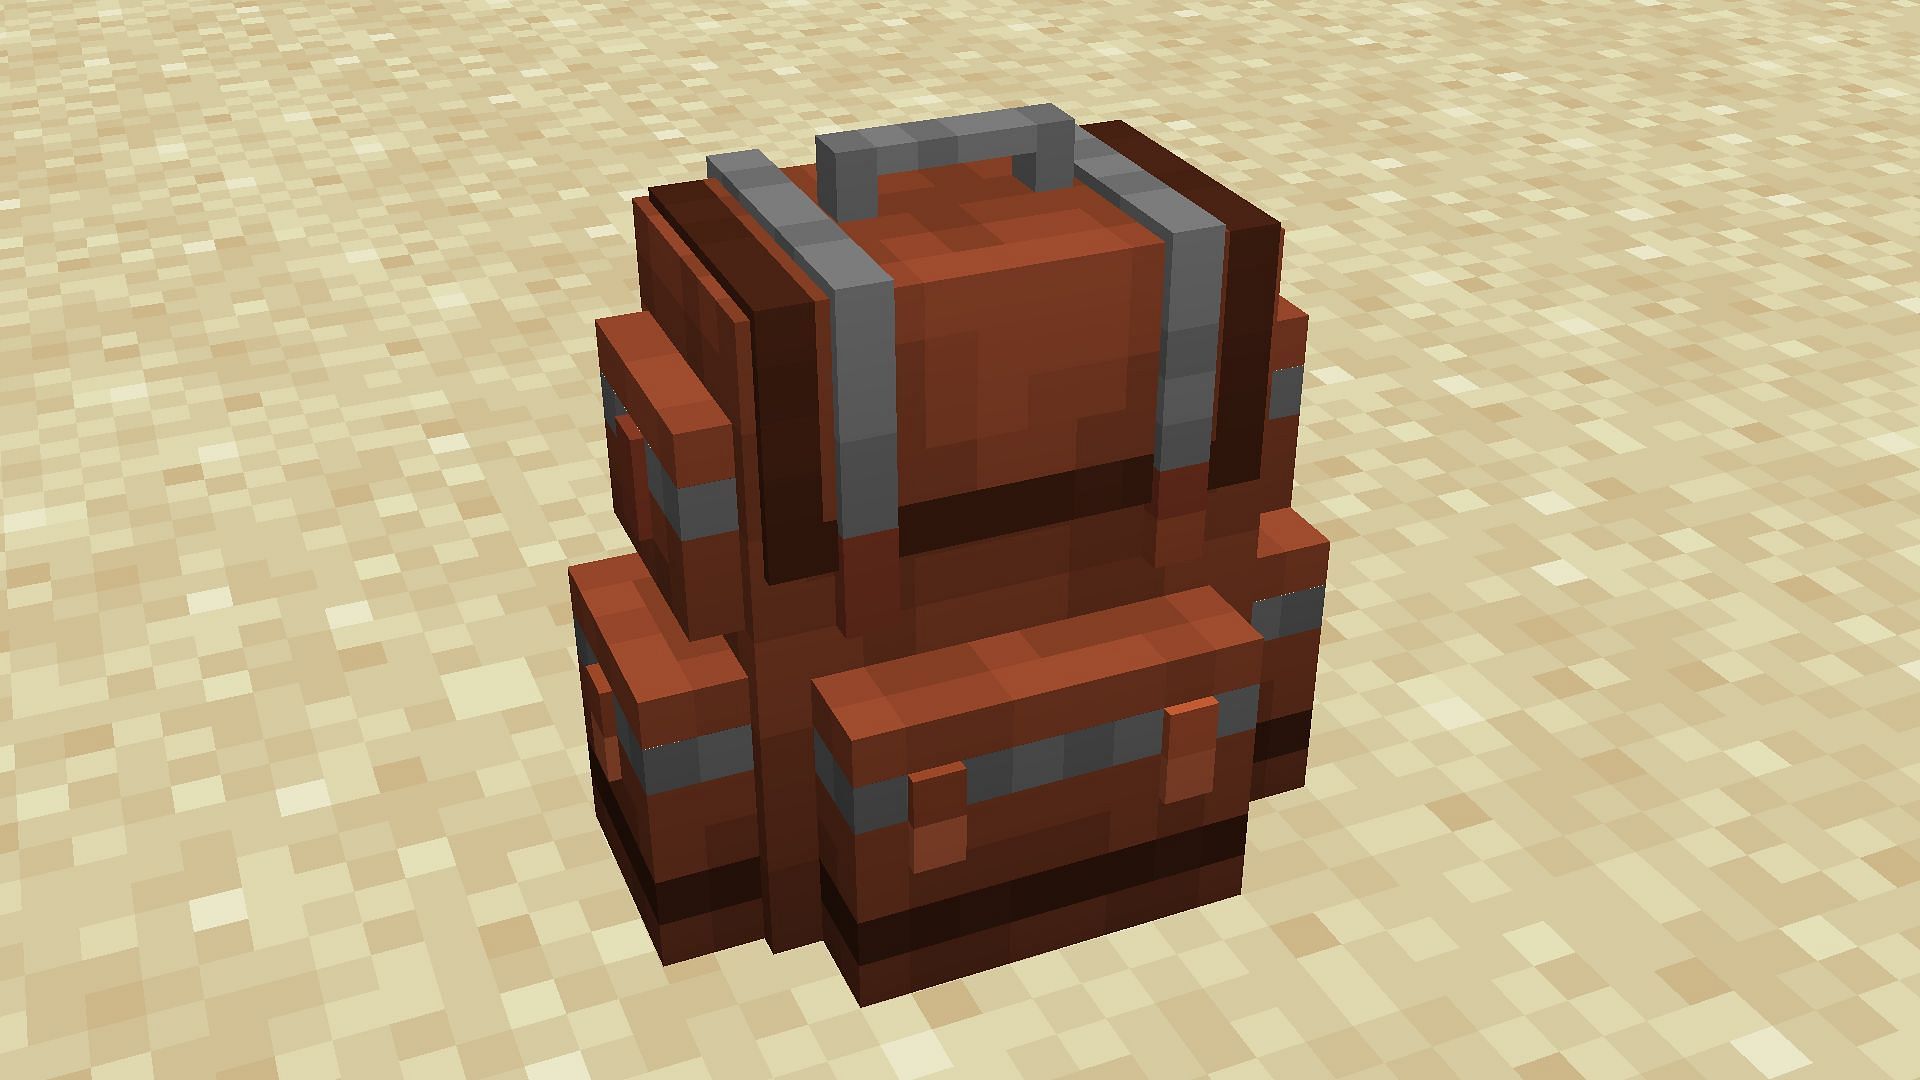 Sophisticated Backpacks are one of the best mods to add more inventory slots in Minecraft (Image via Mojang Studios)